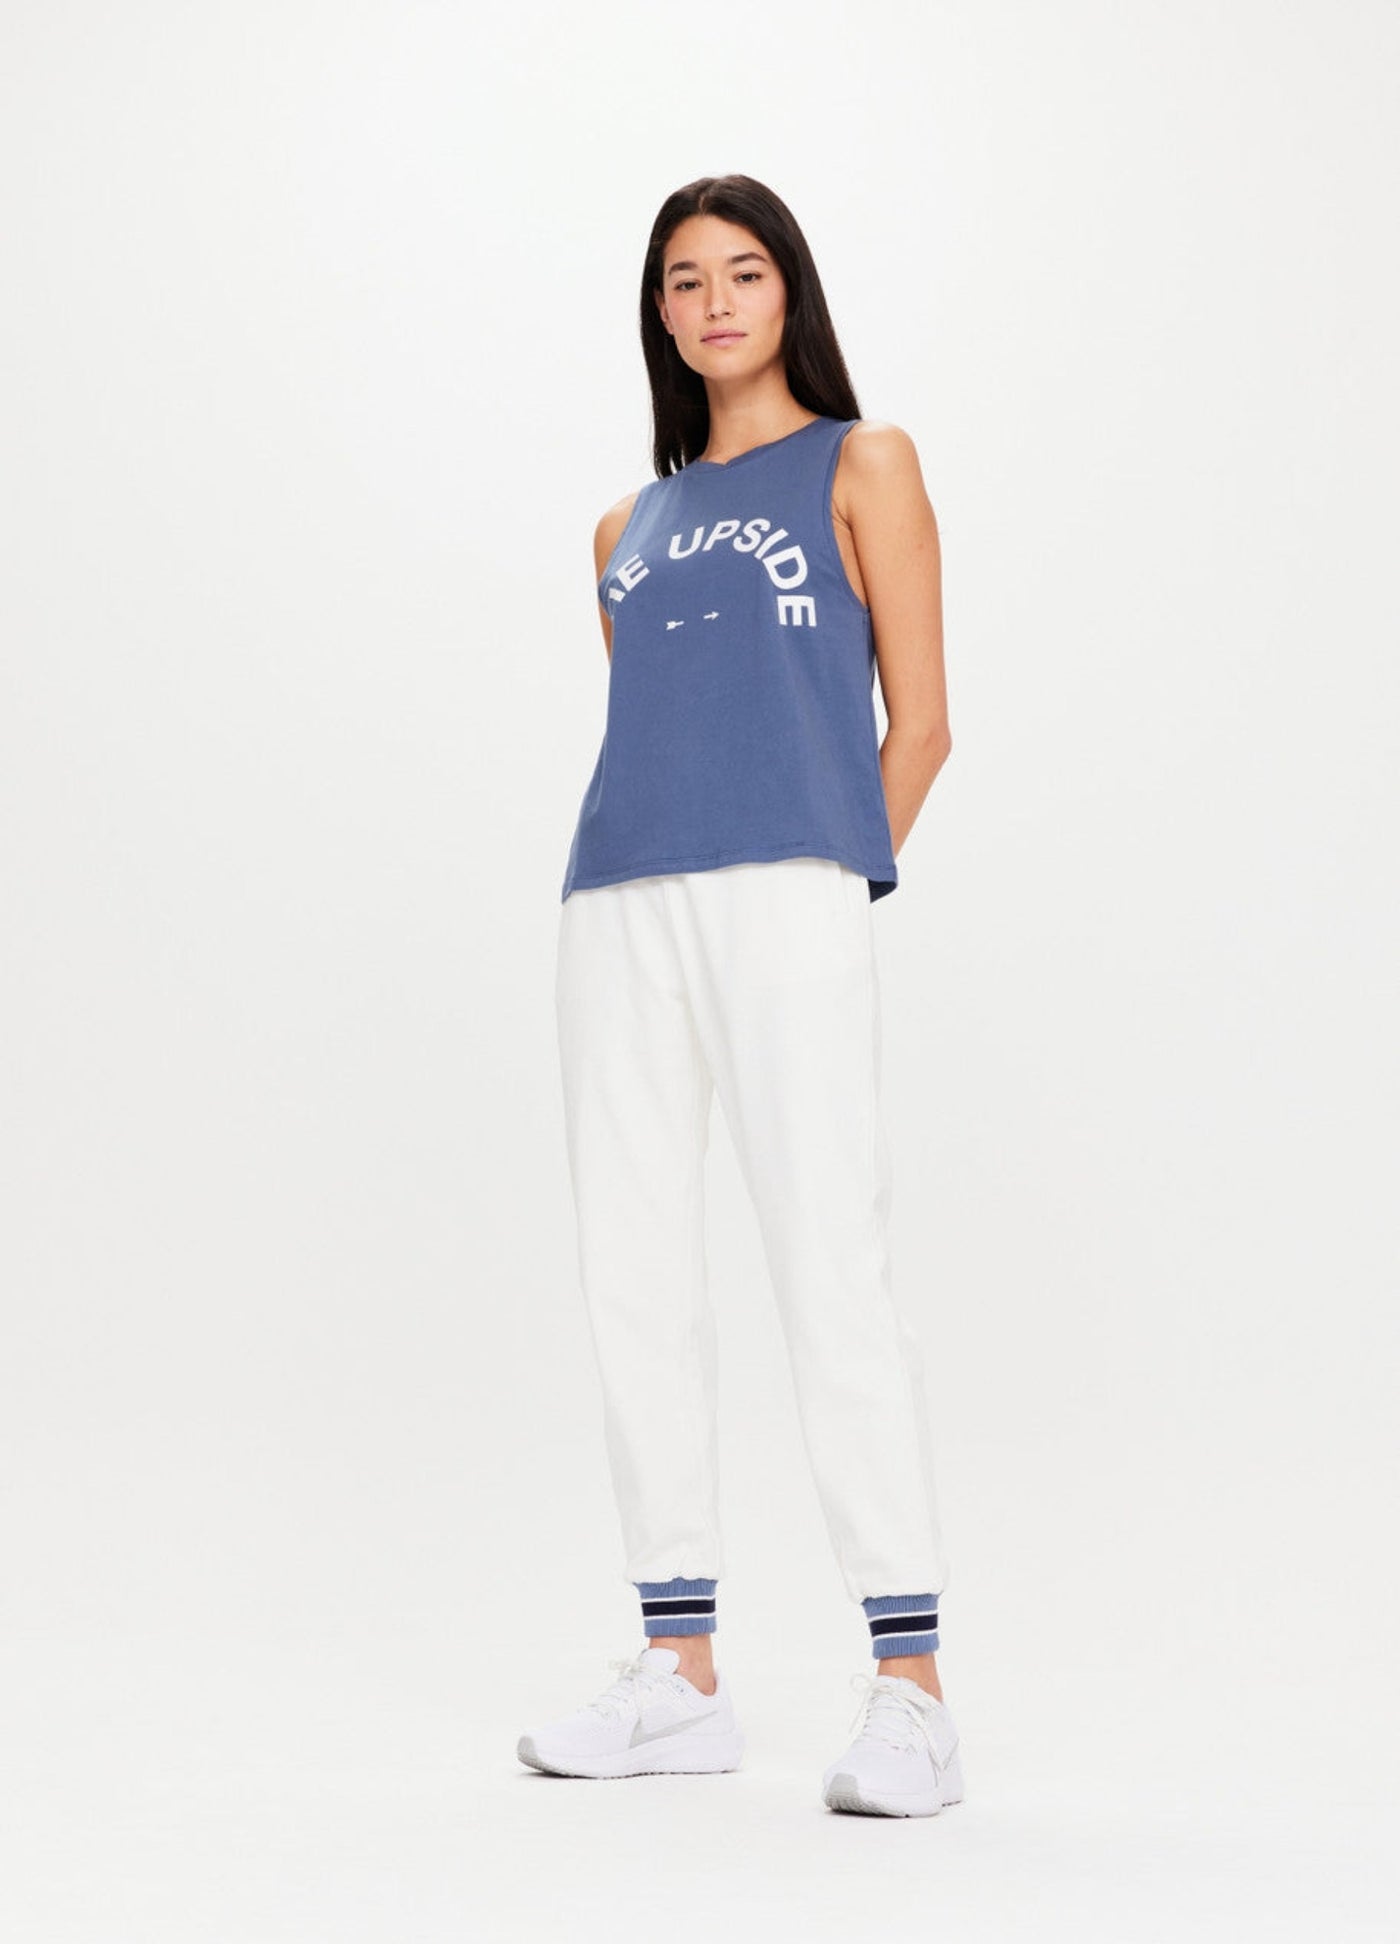 The Upside Sarah Tank in Pool Blue 100% Cotton with Logo design